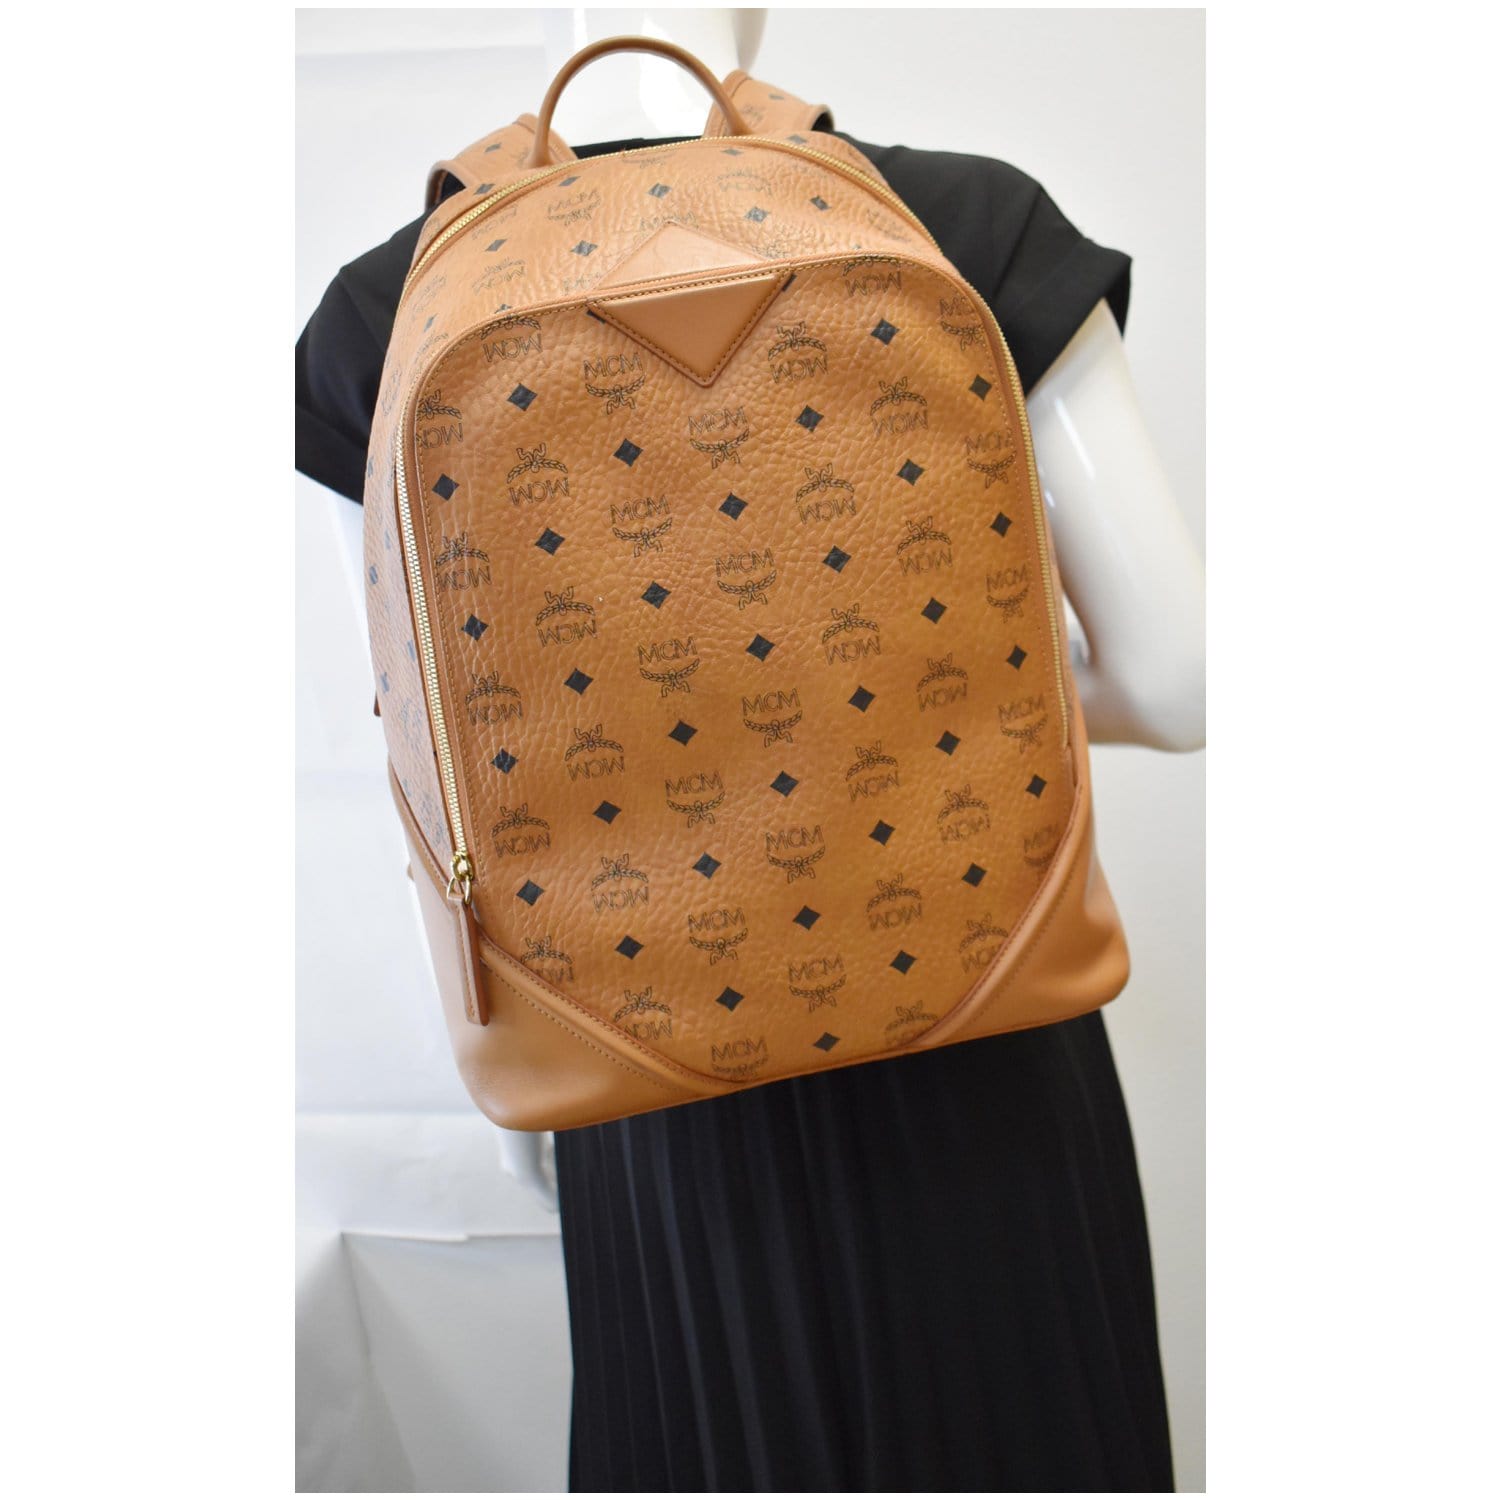 Authentic MCM Medium Backpack for sale